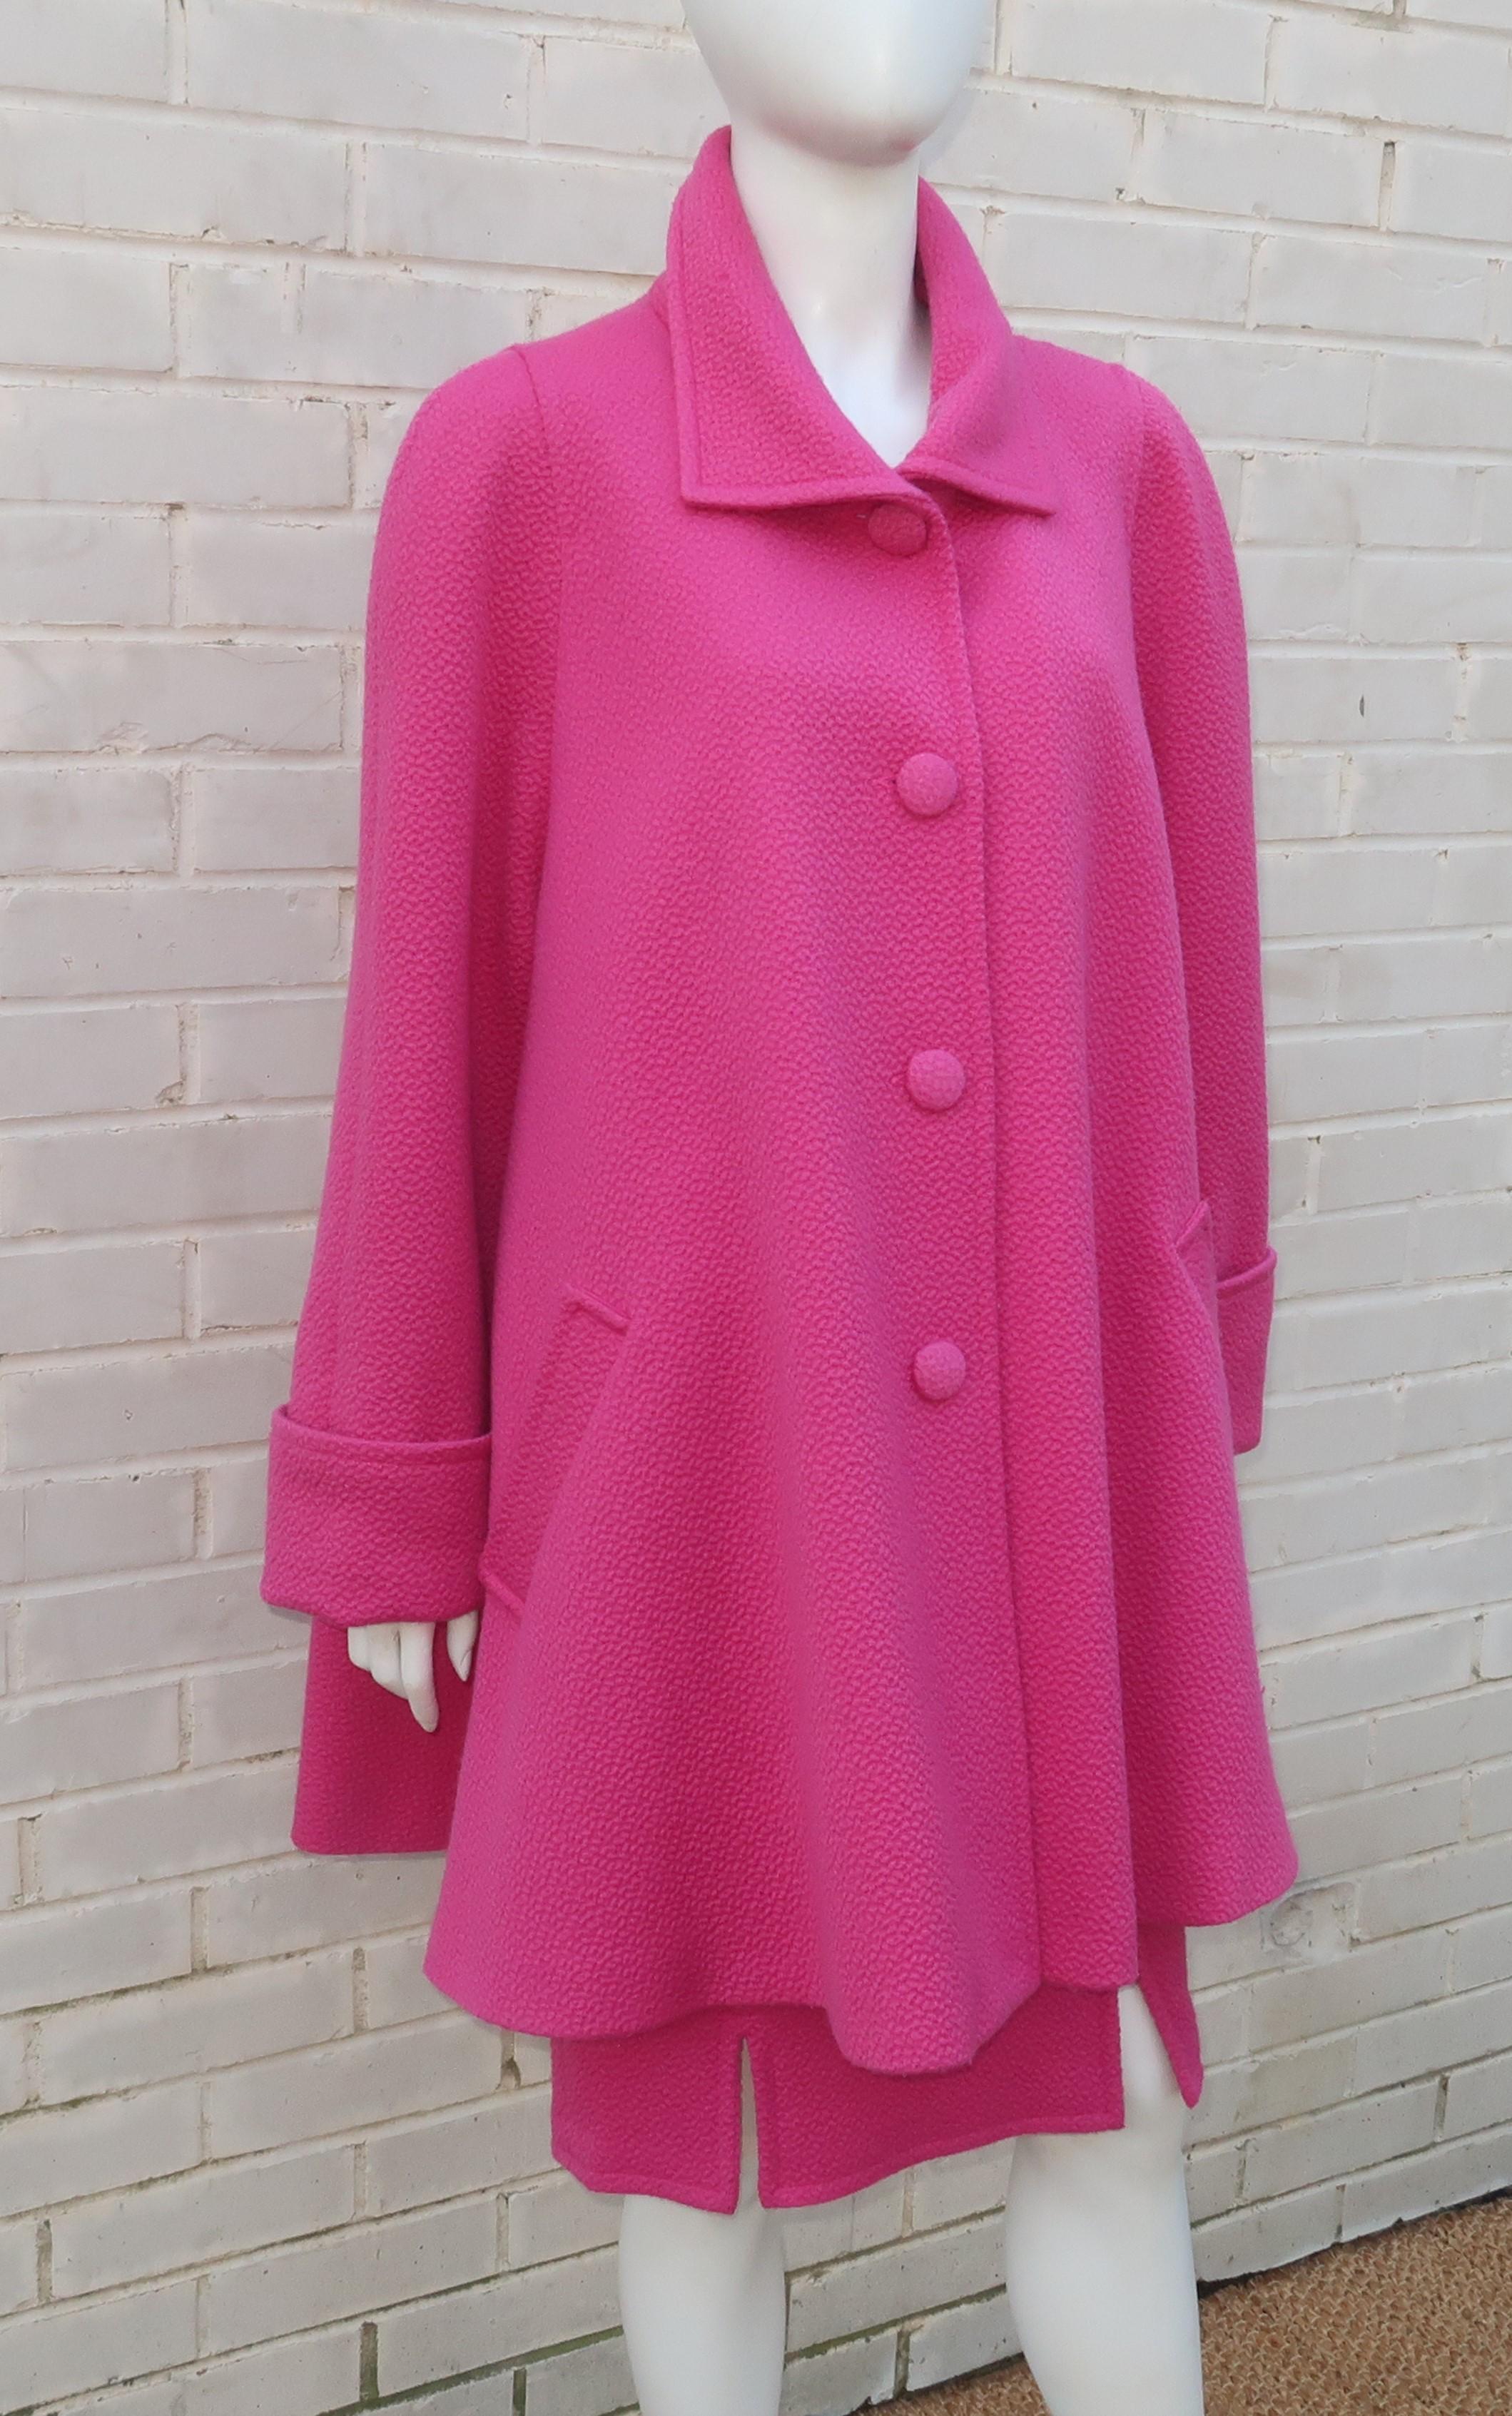 A 1980's hot pink wool pique suit by French label, Liliane Burty, including a straight skirt with front and back vents topped by a swing coat style jacket.  The skirt buttons and zips at the back.  The jacket has covered buttons down the front with